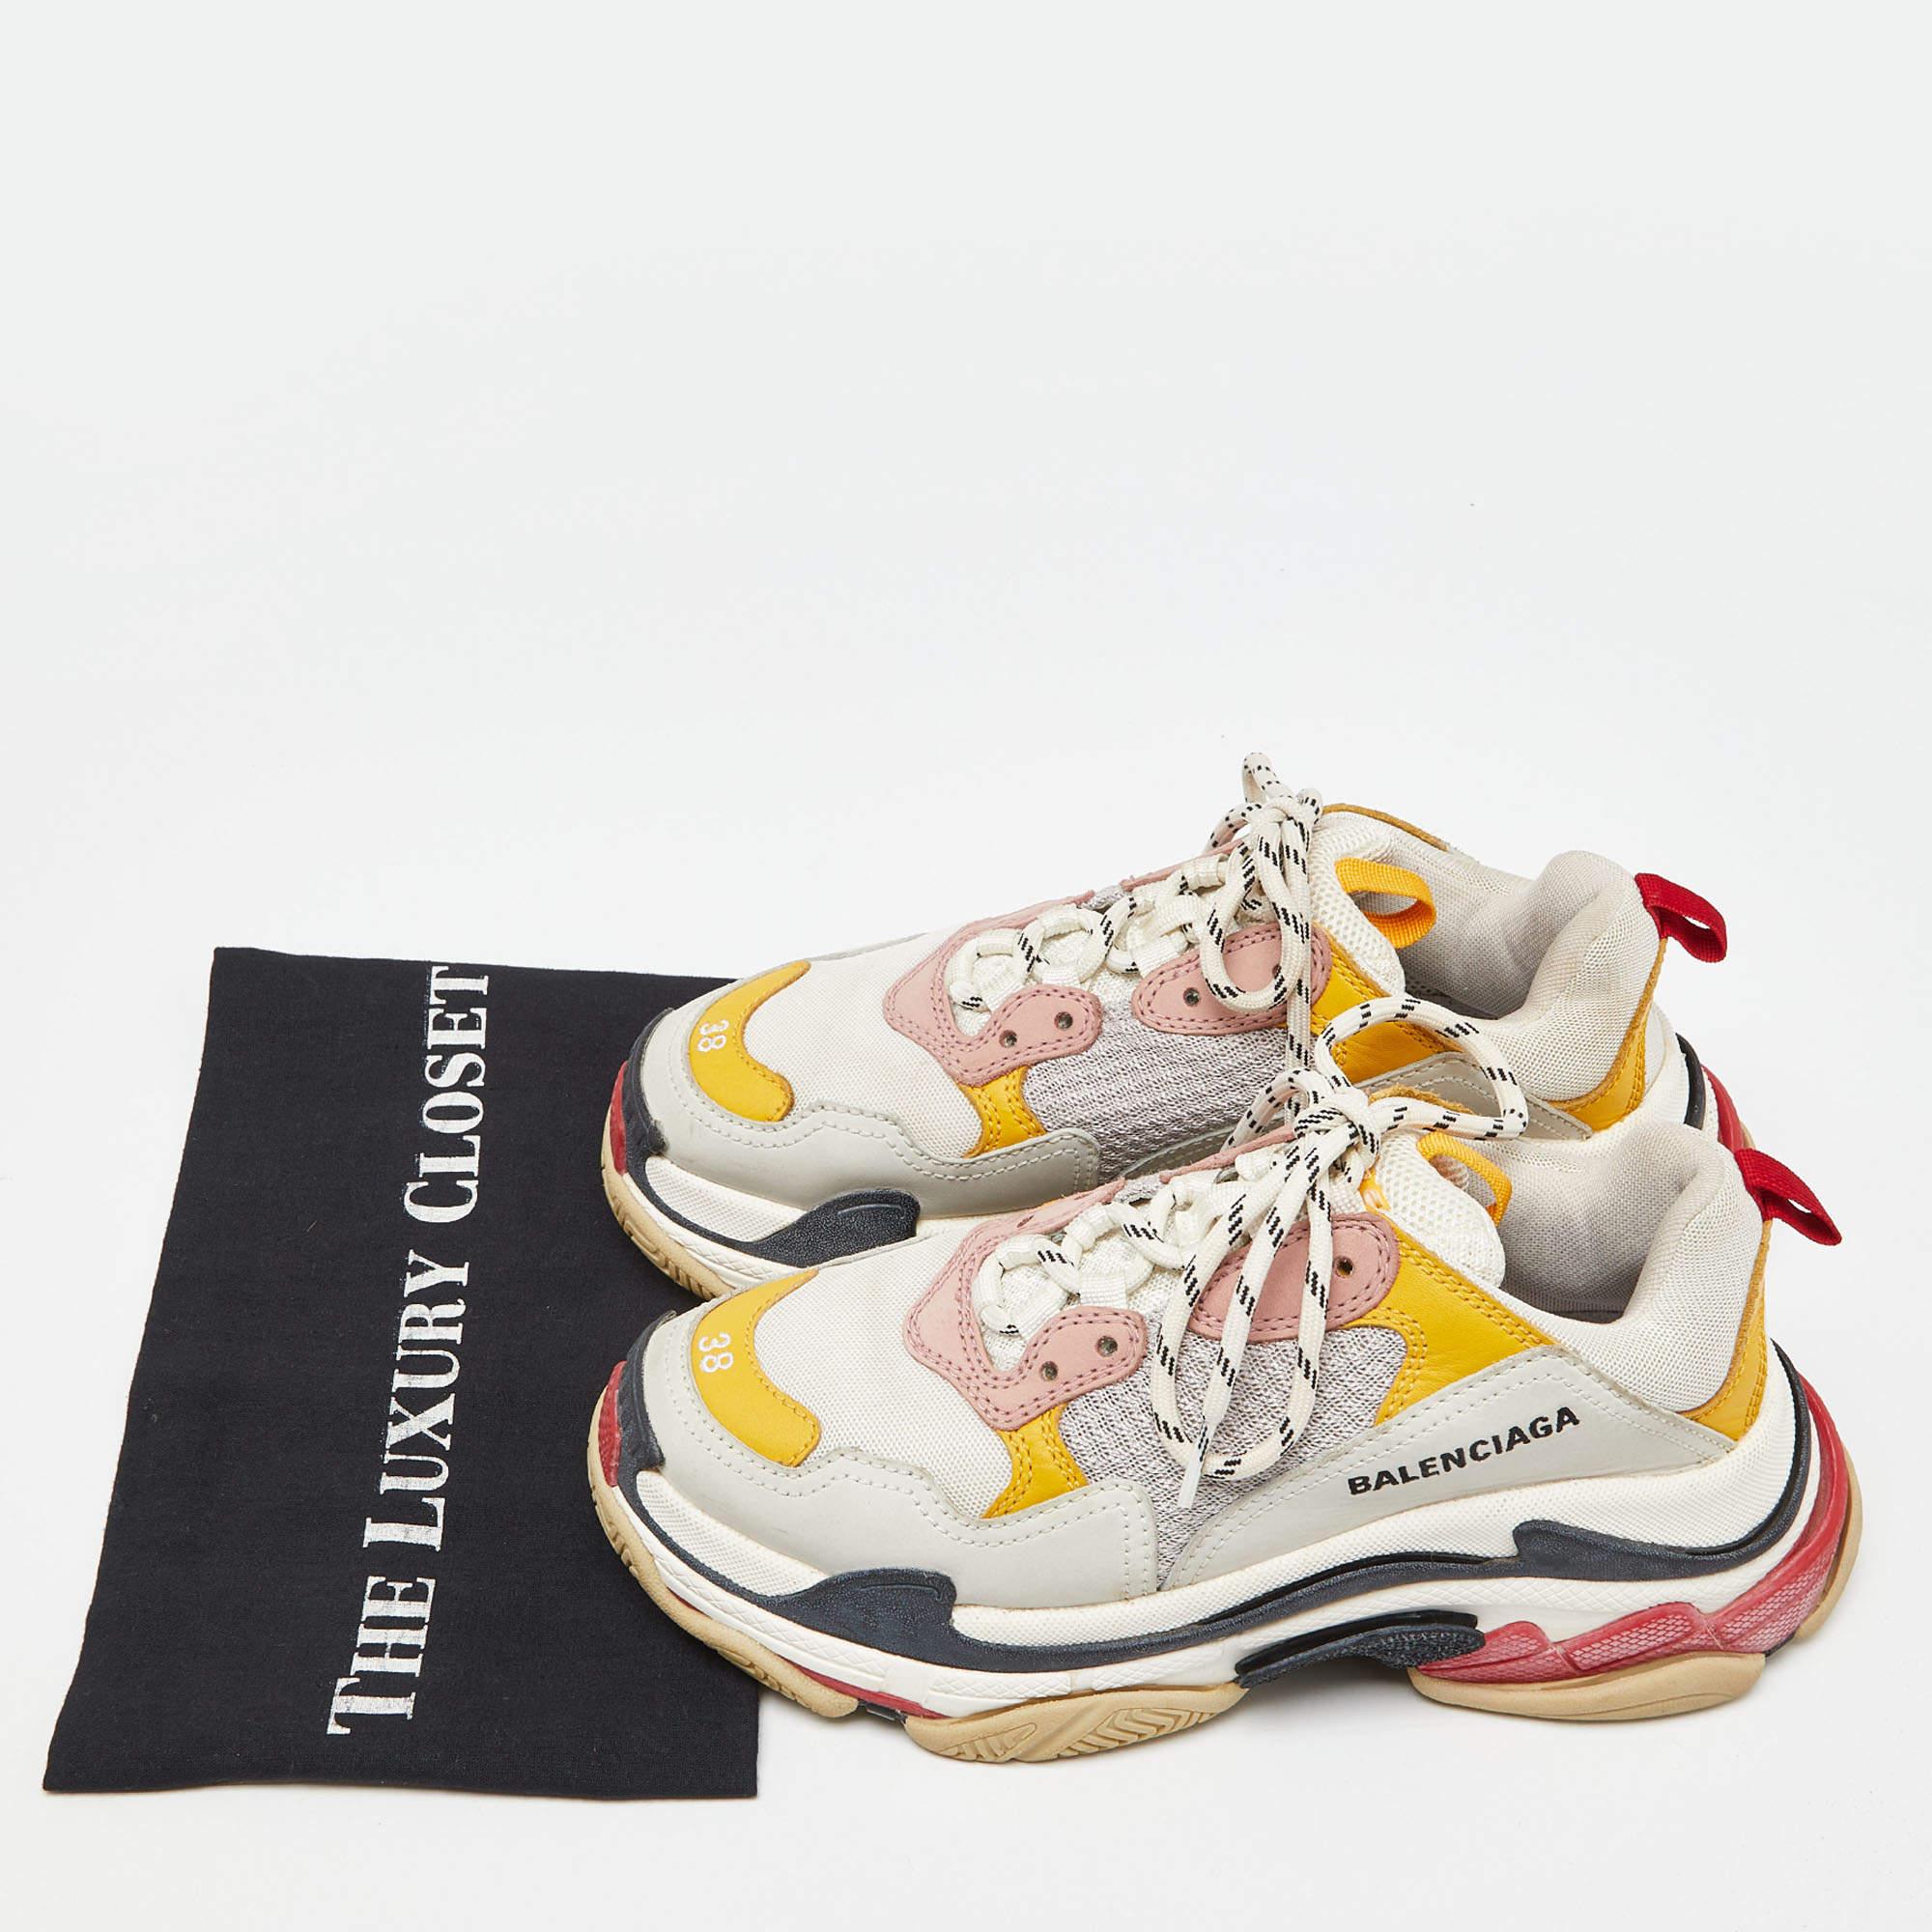 Balenciaga Multicolor Faux Leather and Mesh Triple S Sneakers Size 38 For Sale 5